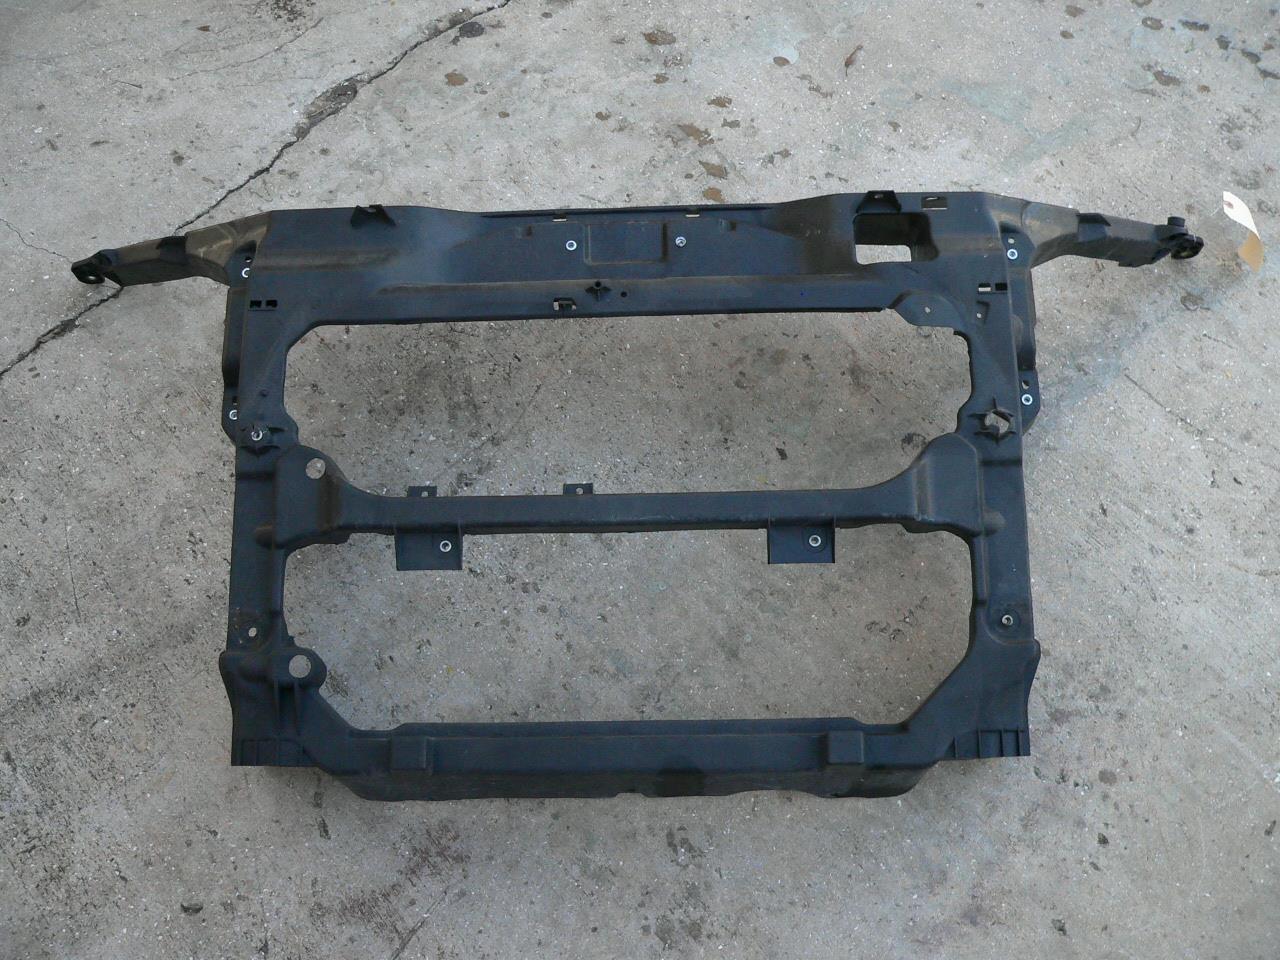 LINCOLN MKX FORD EDGE HEADER PANEL RADIATOR SUPPORT 07 08 09 10